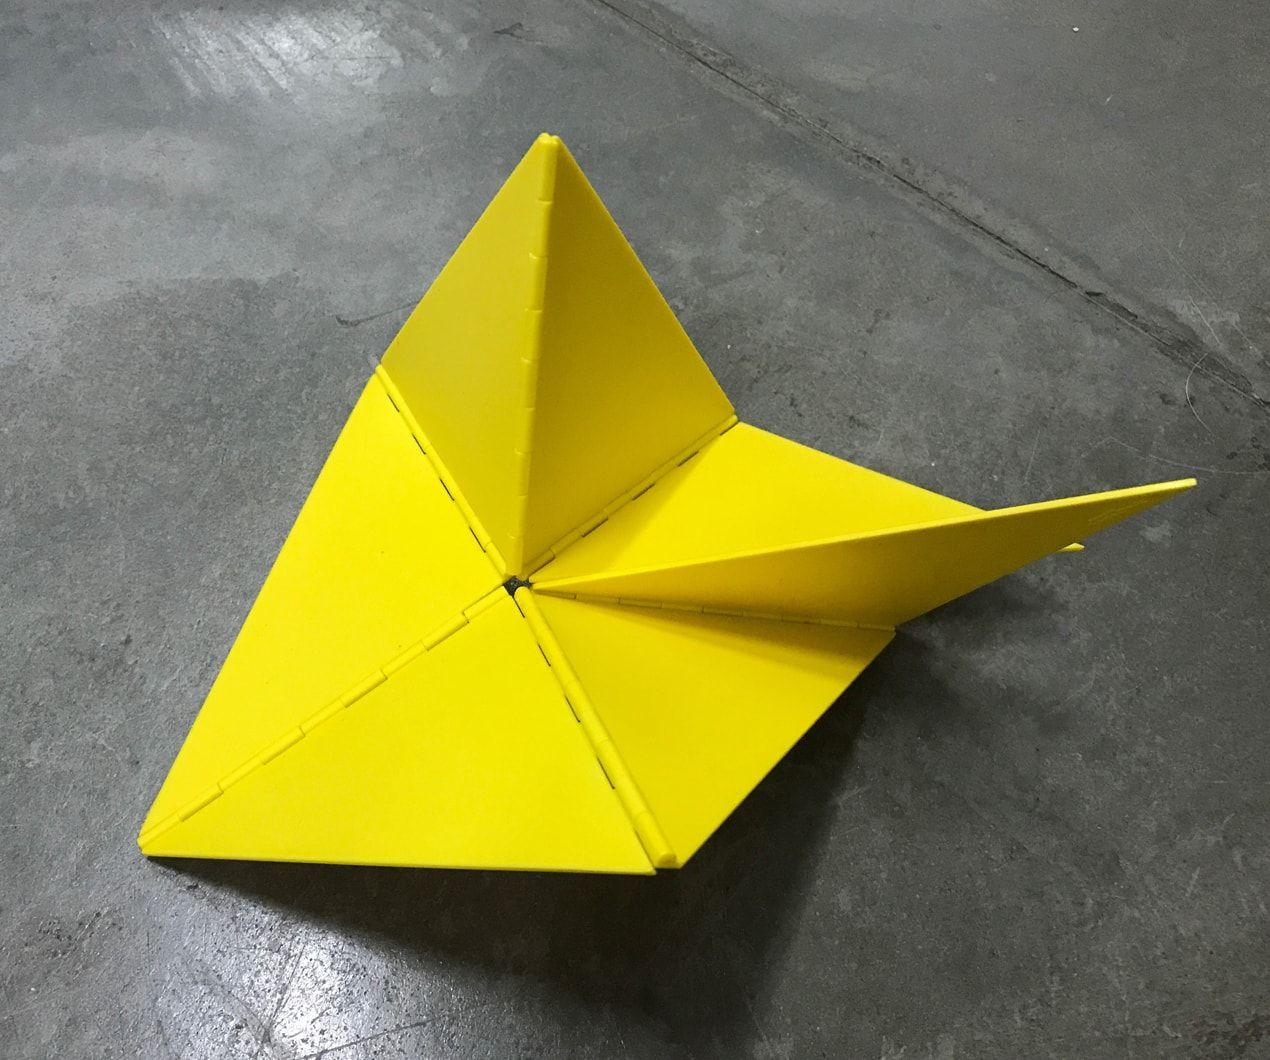 Other Lygia Clark Crab Critter Yellow Plastic Reproduction For Sale